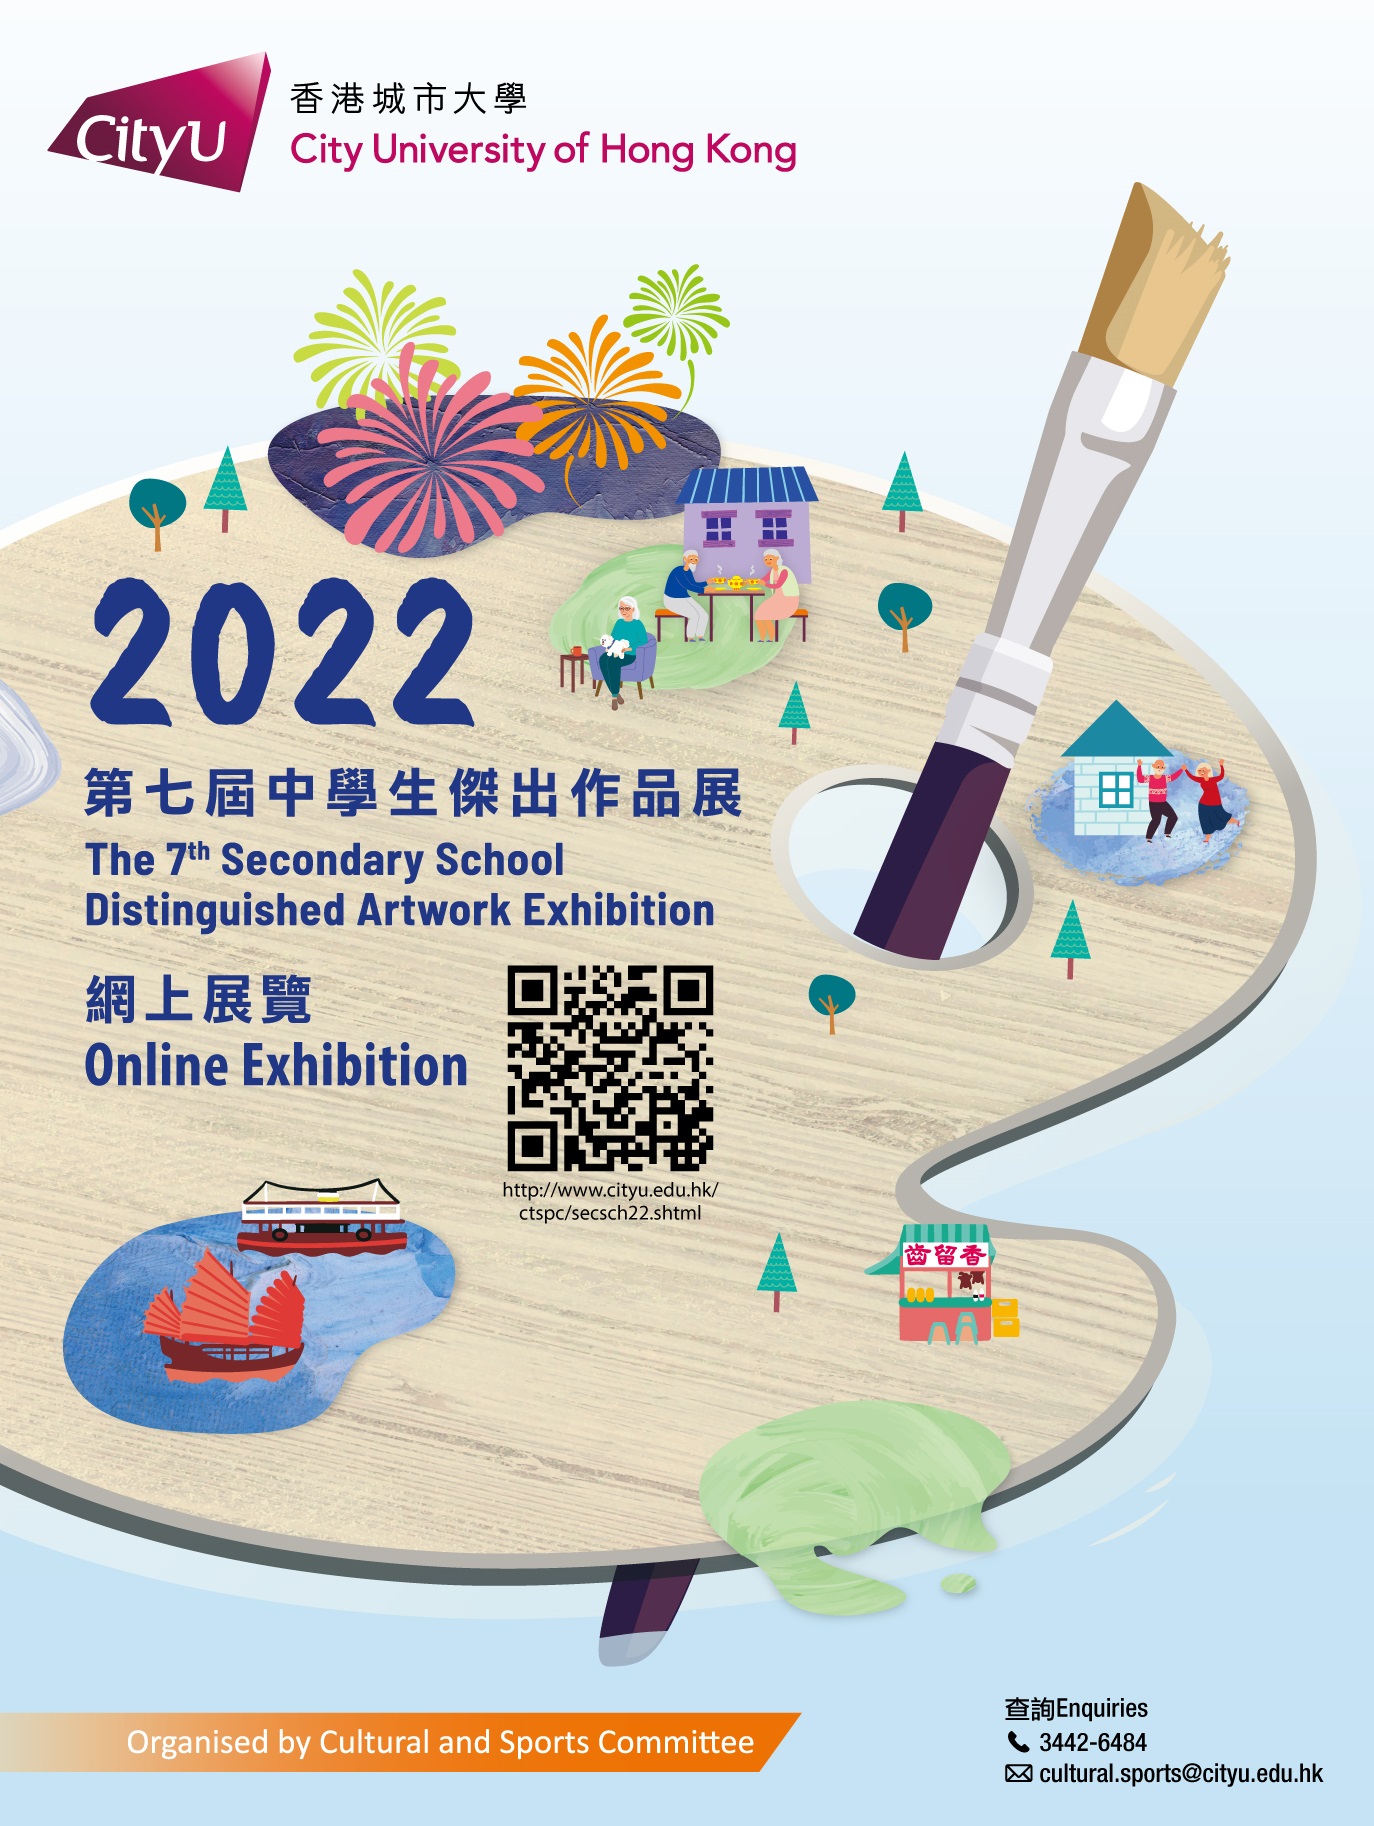 The 7th Secondary School Distinguished Artwork Exhibition 2022